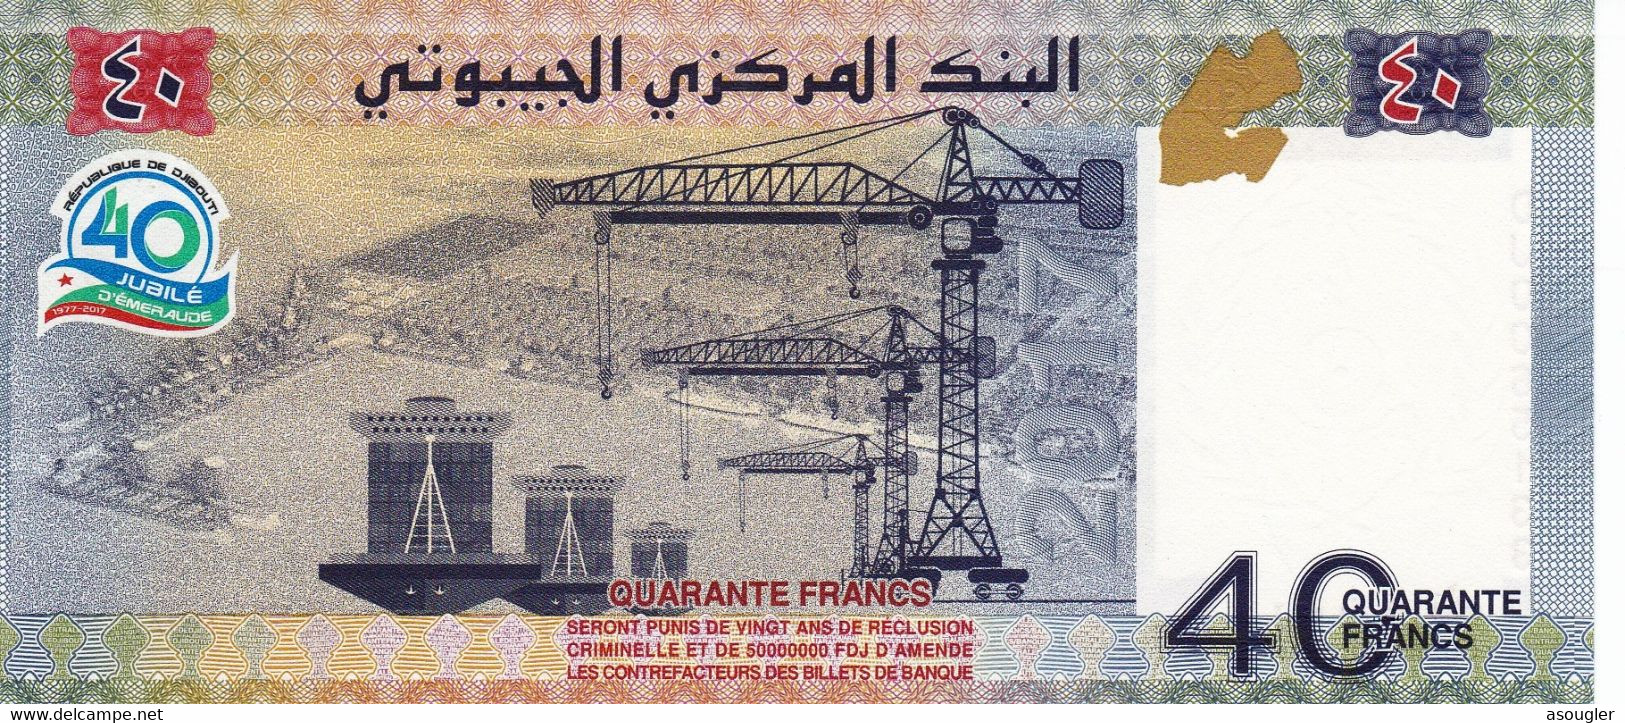 Djibouti 40 Francs 2017 UNC P-46 Commemorative Issue 40th Anniversary Of Independence. Free S/H Via Regular Air Mail. - Djibouti